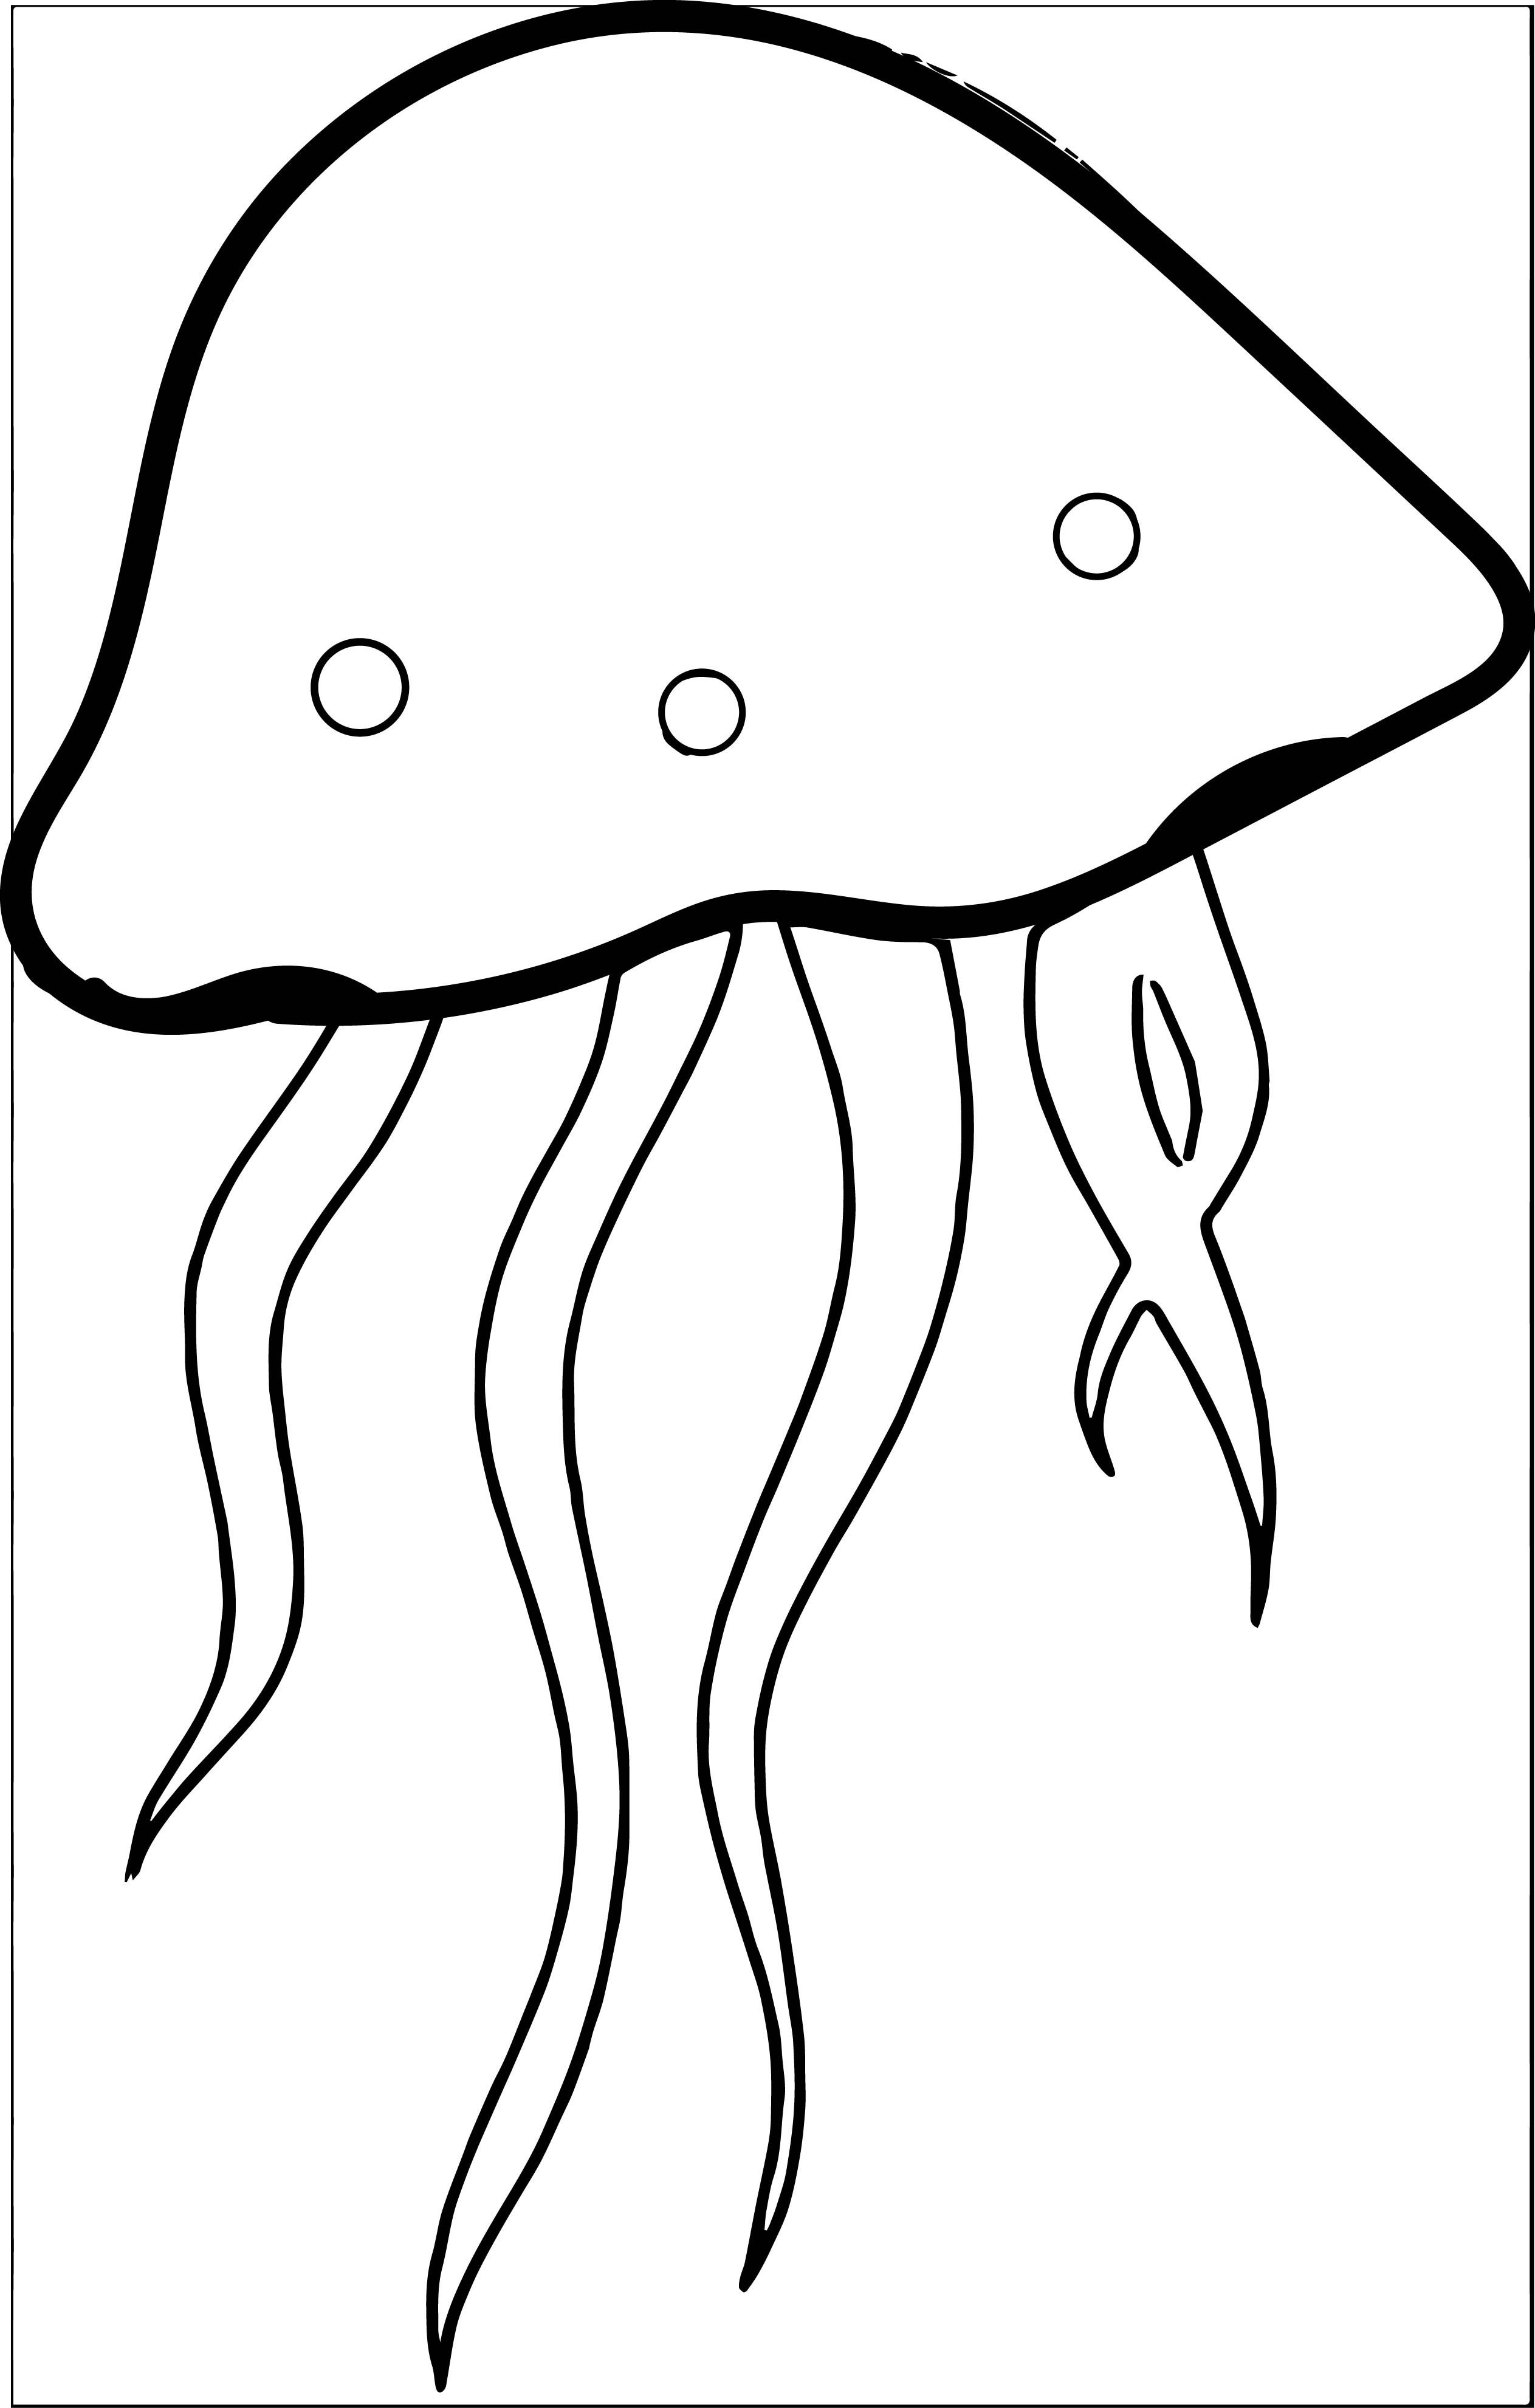 Jellyfish clipart clip art image of a jellyfish